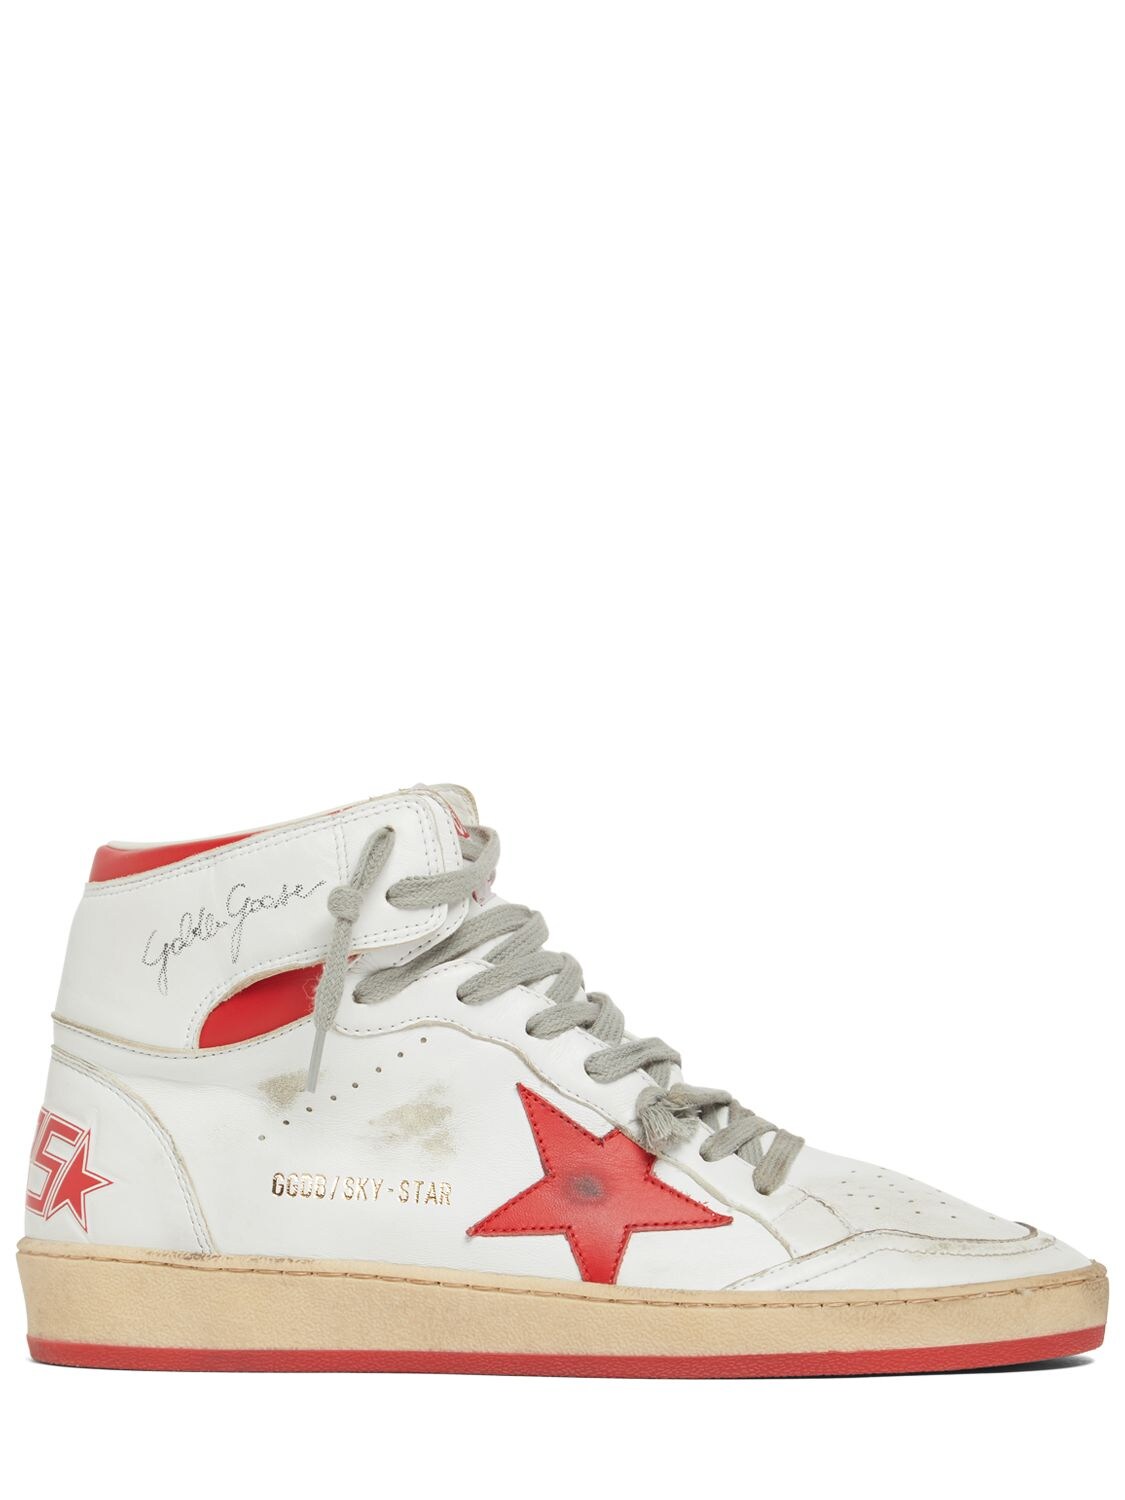 GOLDEN GOOSE 20MM SKY STAR NAPPA LEATHER trainers